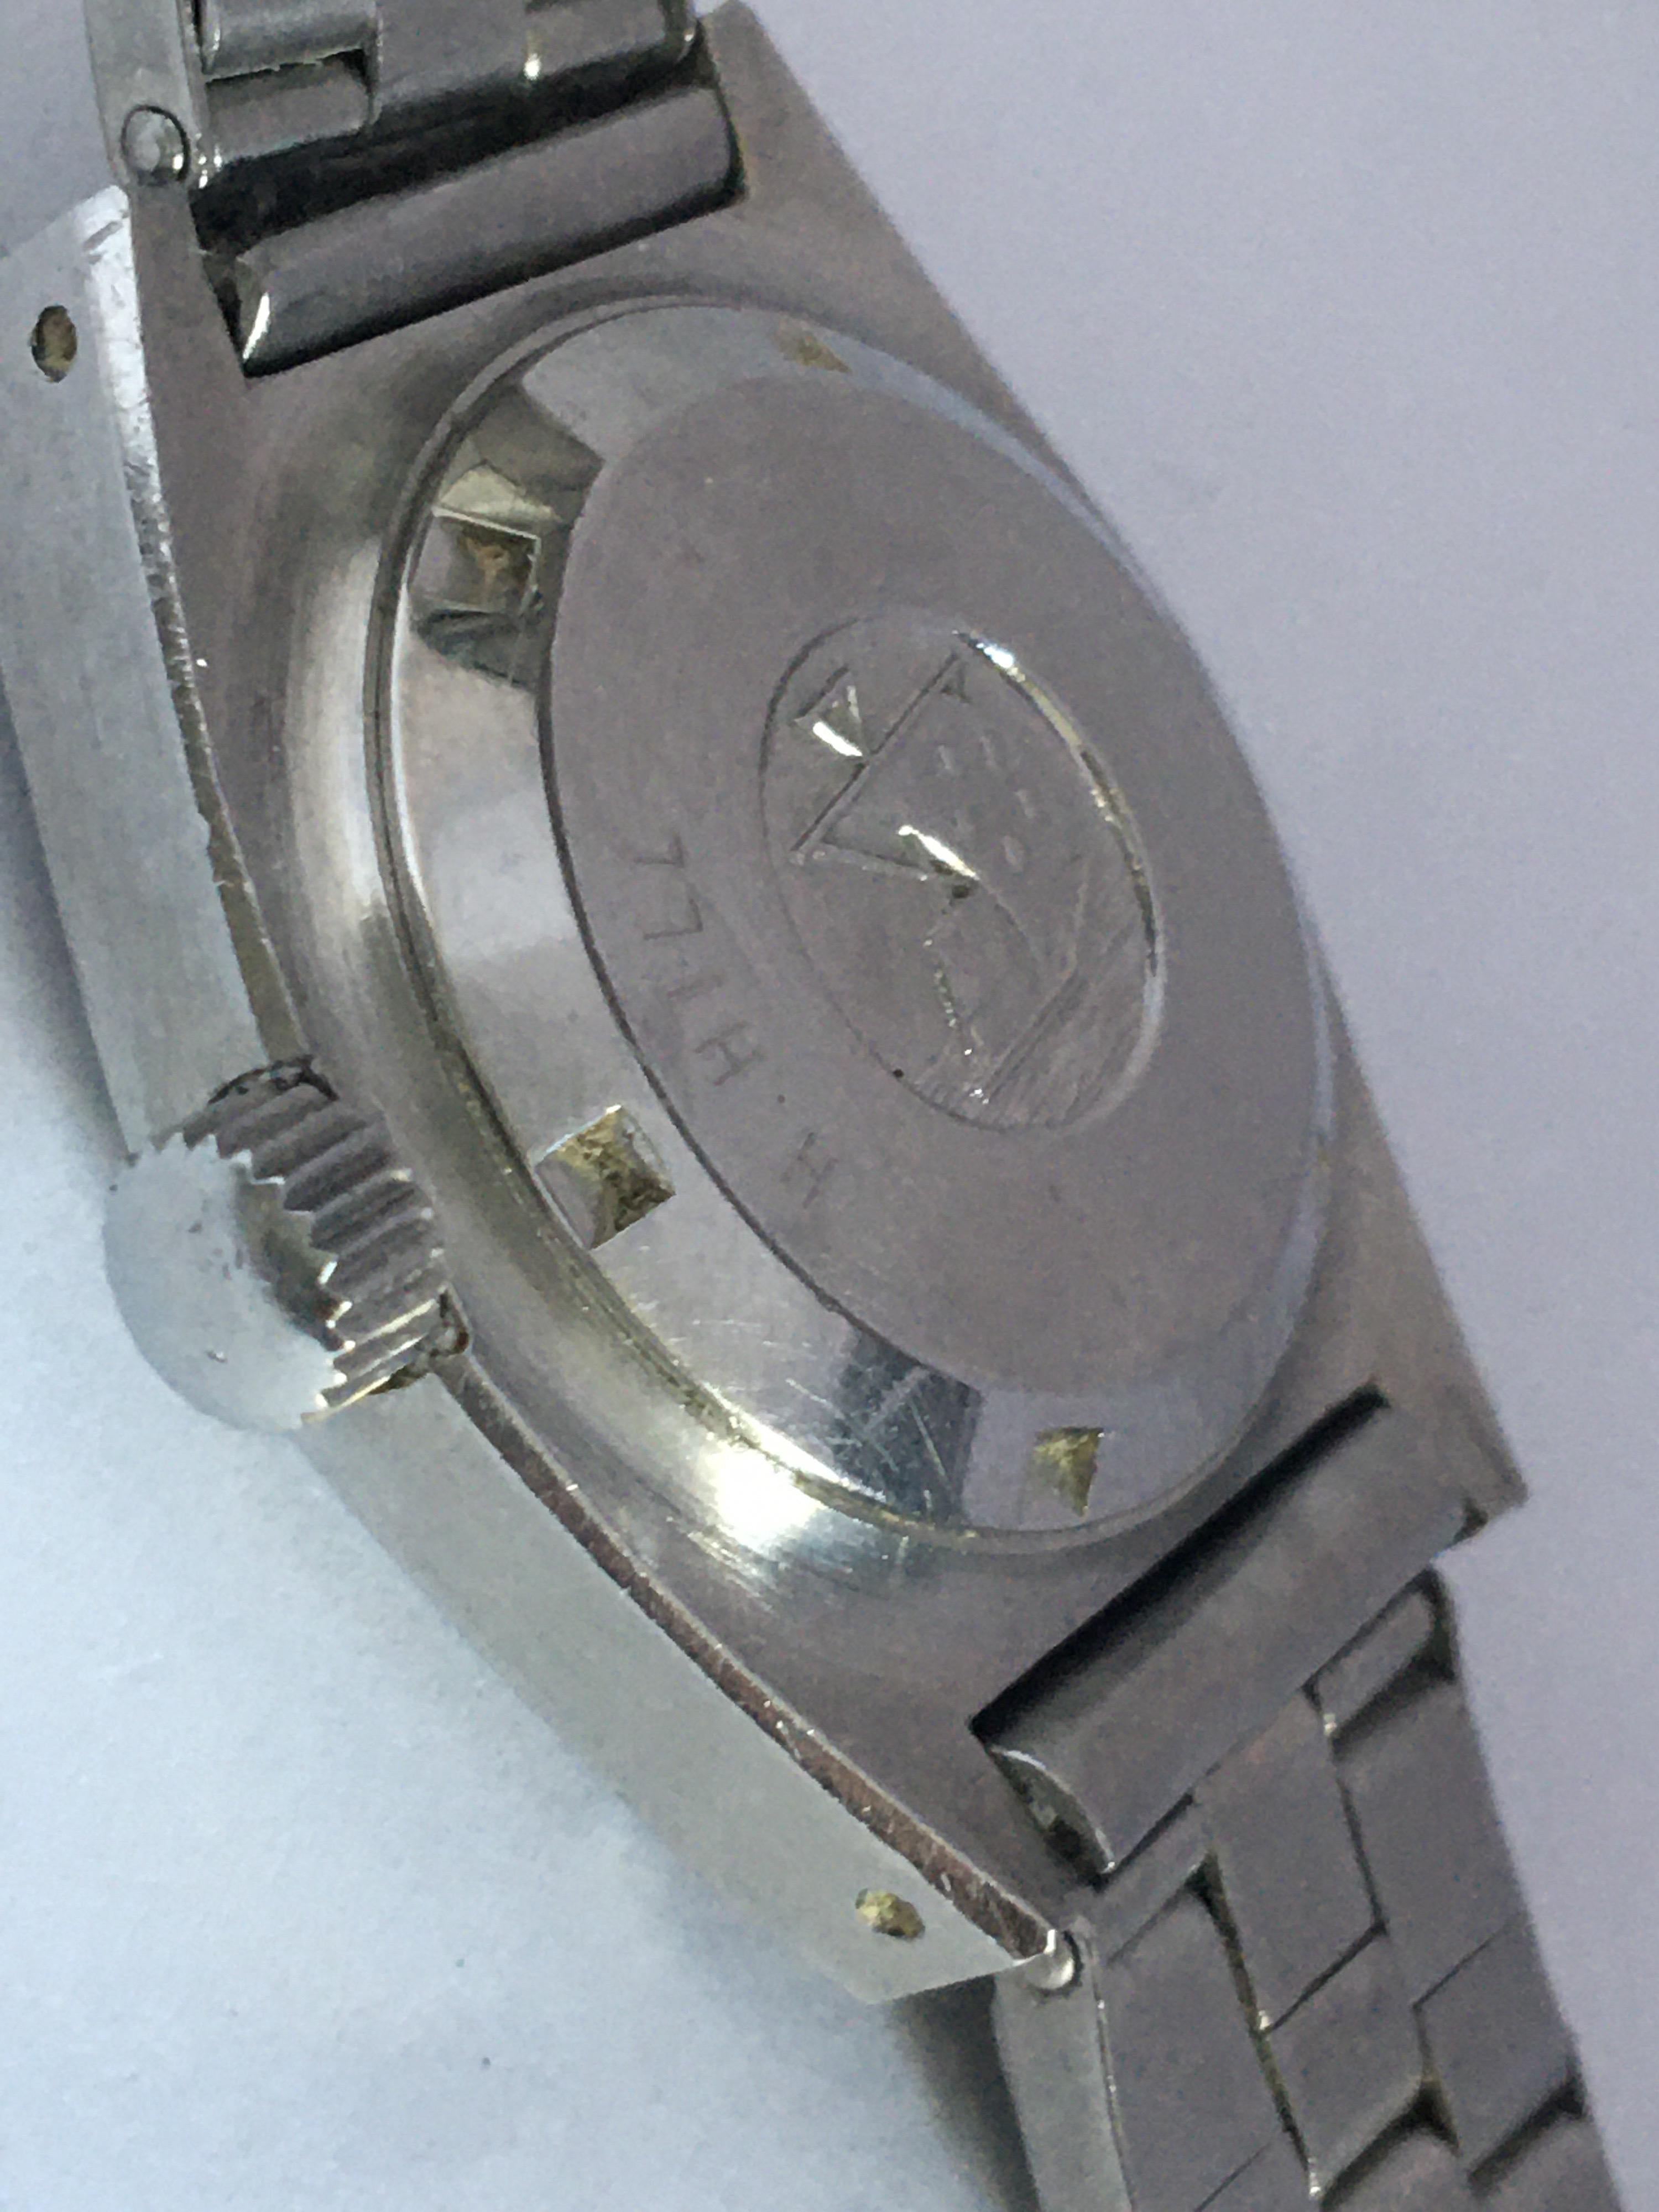 Vintage 1960s Eterna Matic Kon Tiki 20 Date SS Automatic winding Ladies watch For Sale 4